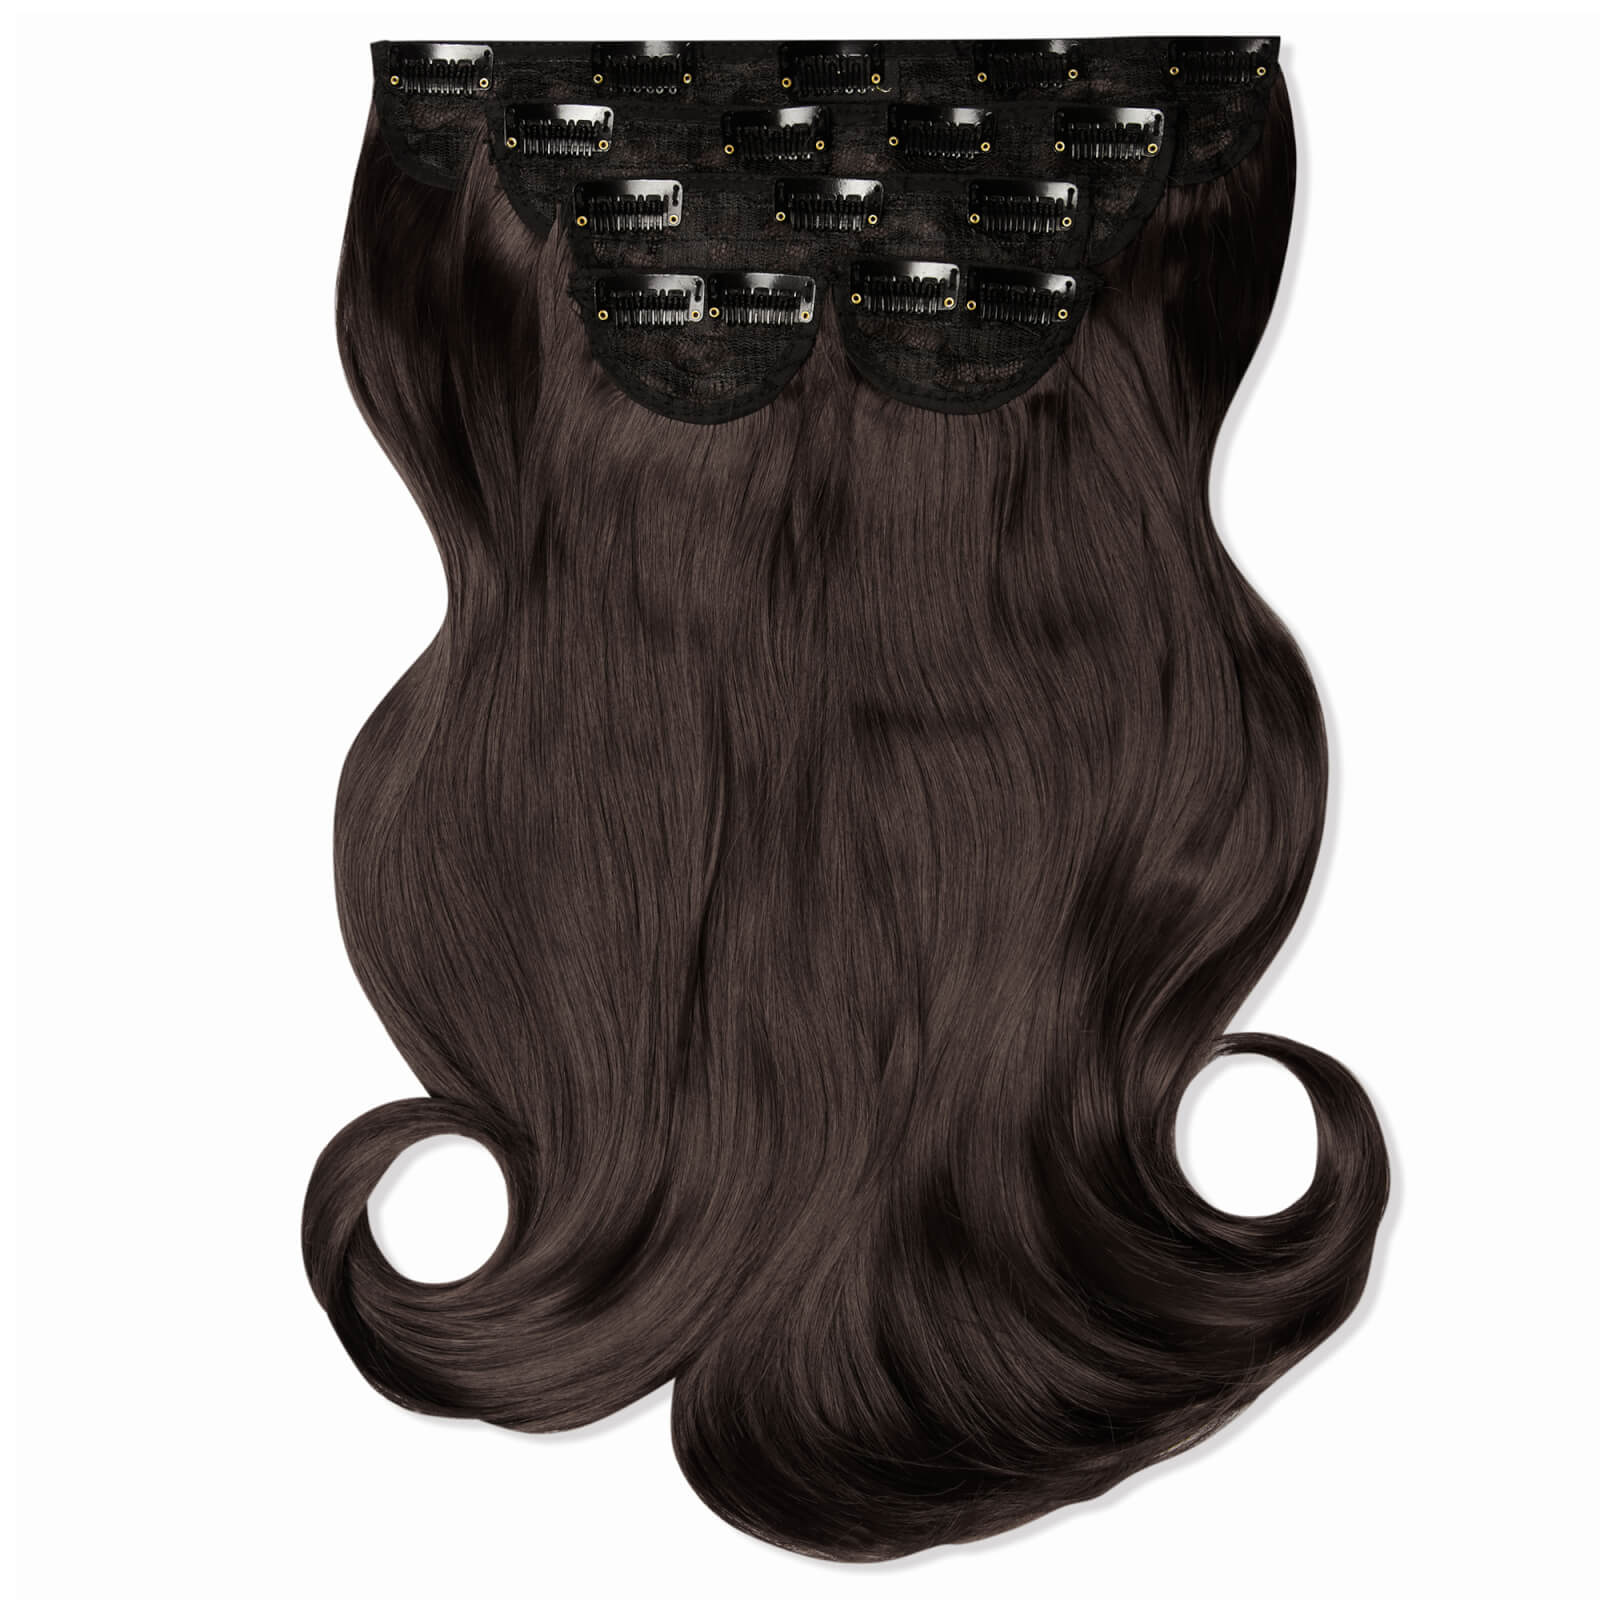 Lullabellz Super Thick 16  5 Piece Blow Dry Wavy Clip In Extensions (various Shades) - Dark Brown